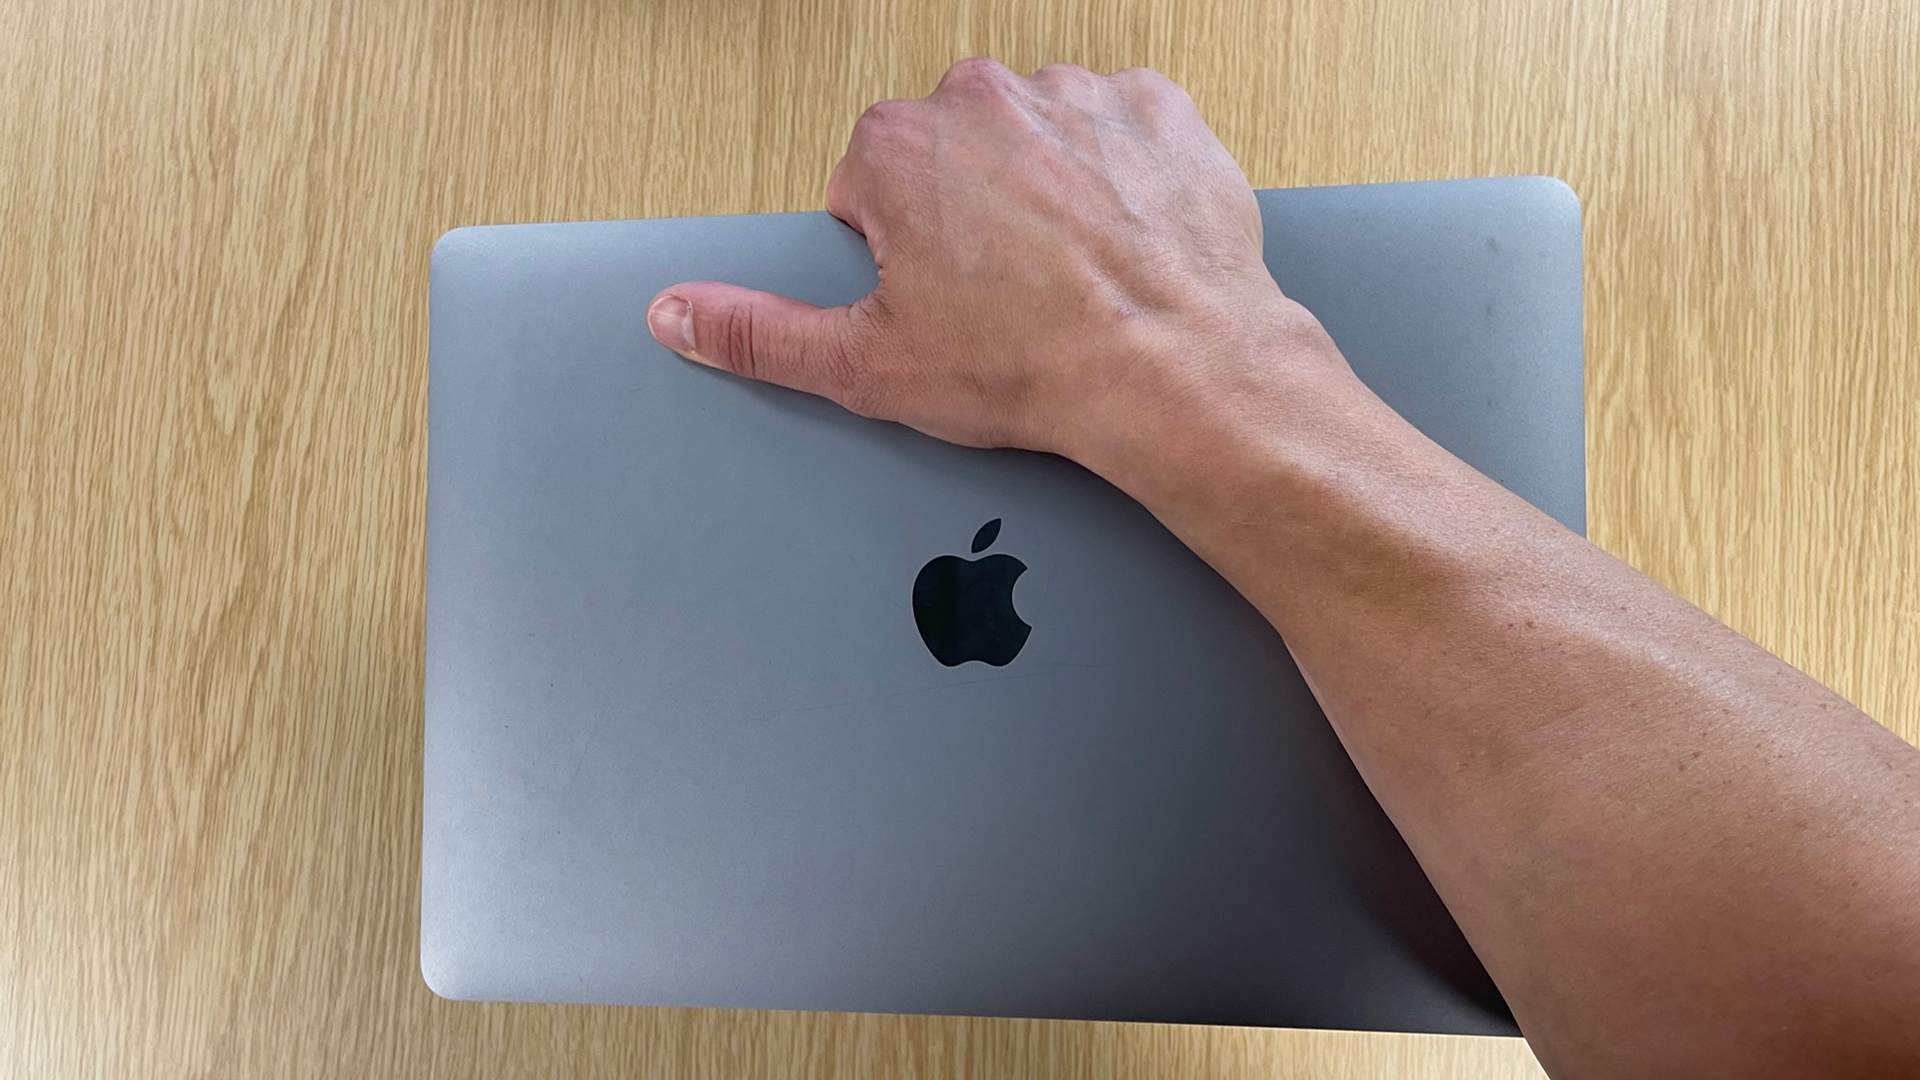 My massive arm holding the small MacBook Air.